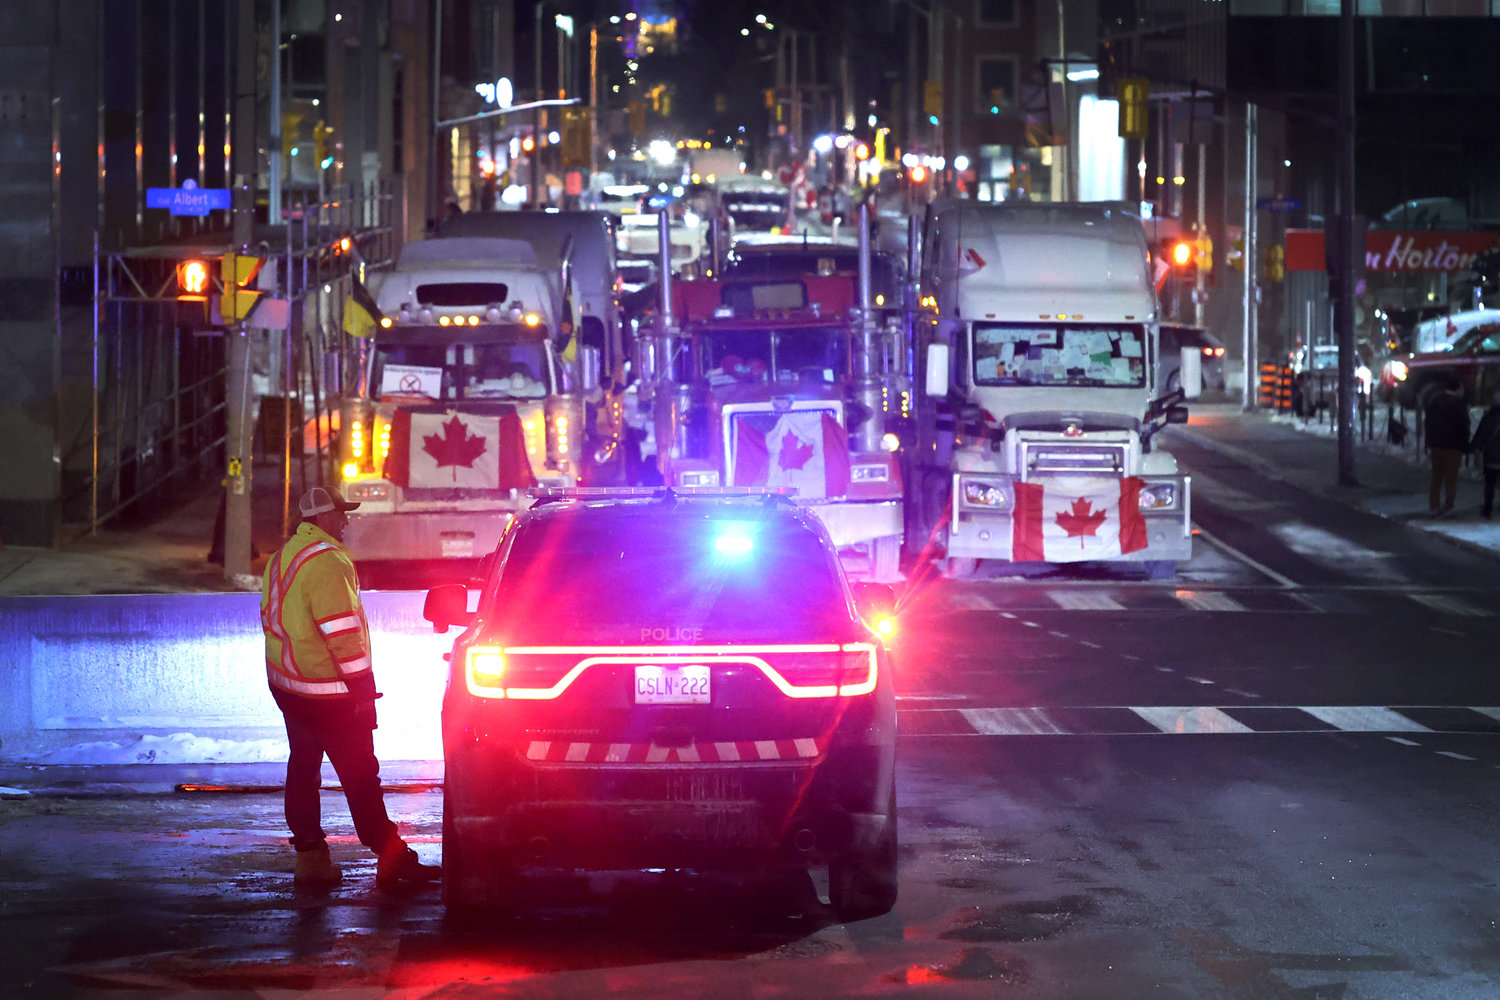 A police vehicle blocks a downtown street to prevent trucks from joining a blockade of truckers protesting vaccine mandates near the Parliament Buildings on Feb. 15, 2022, in Ottawa, Canada. (Scott Olson/Getty Images/TNS)